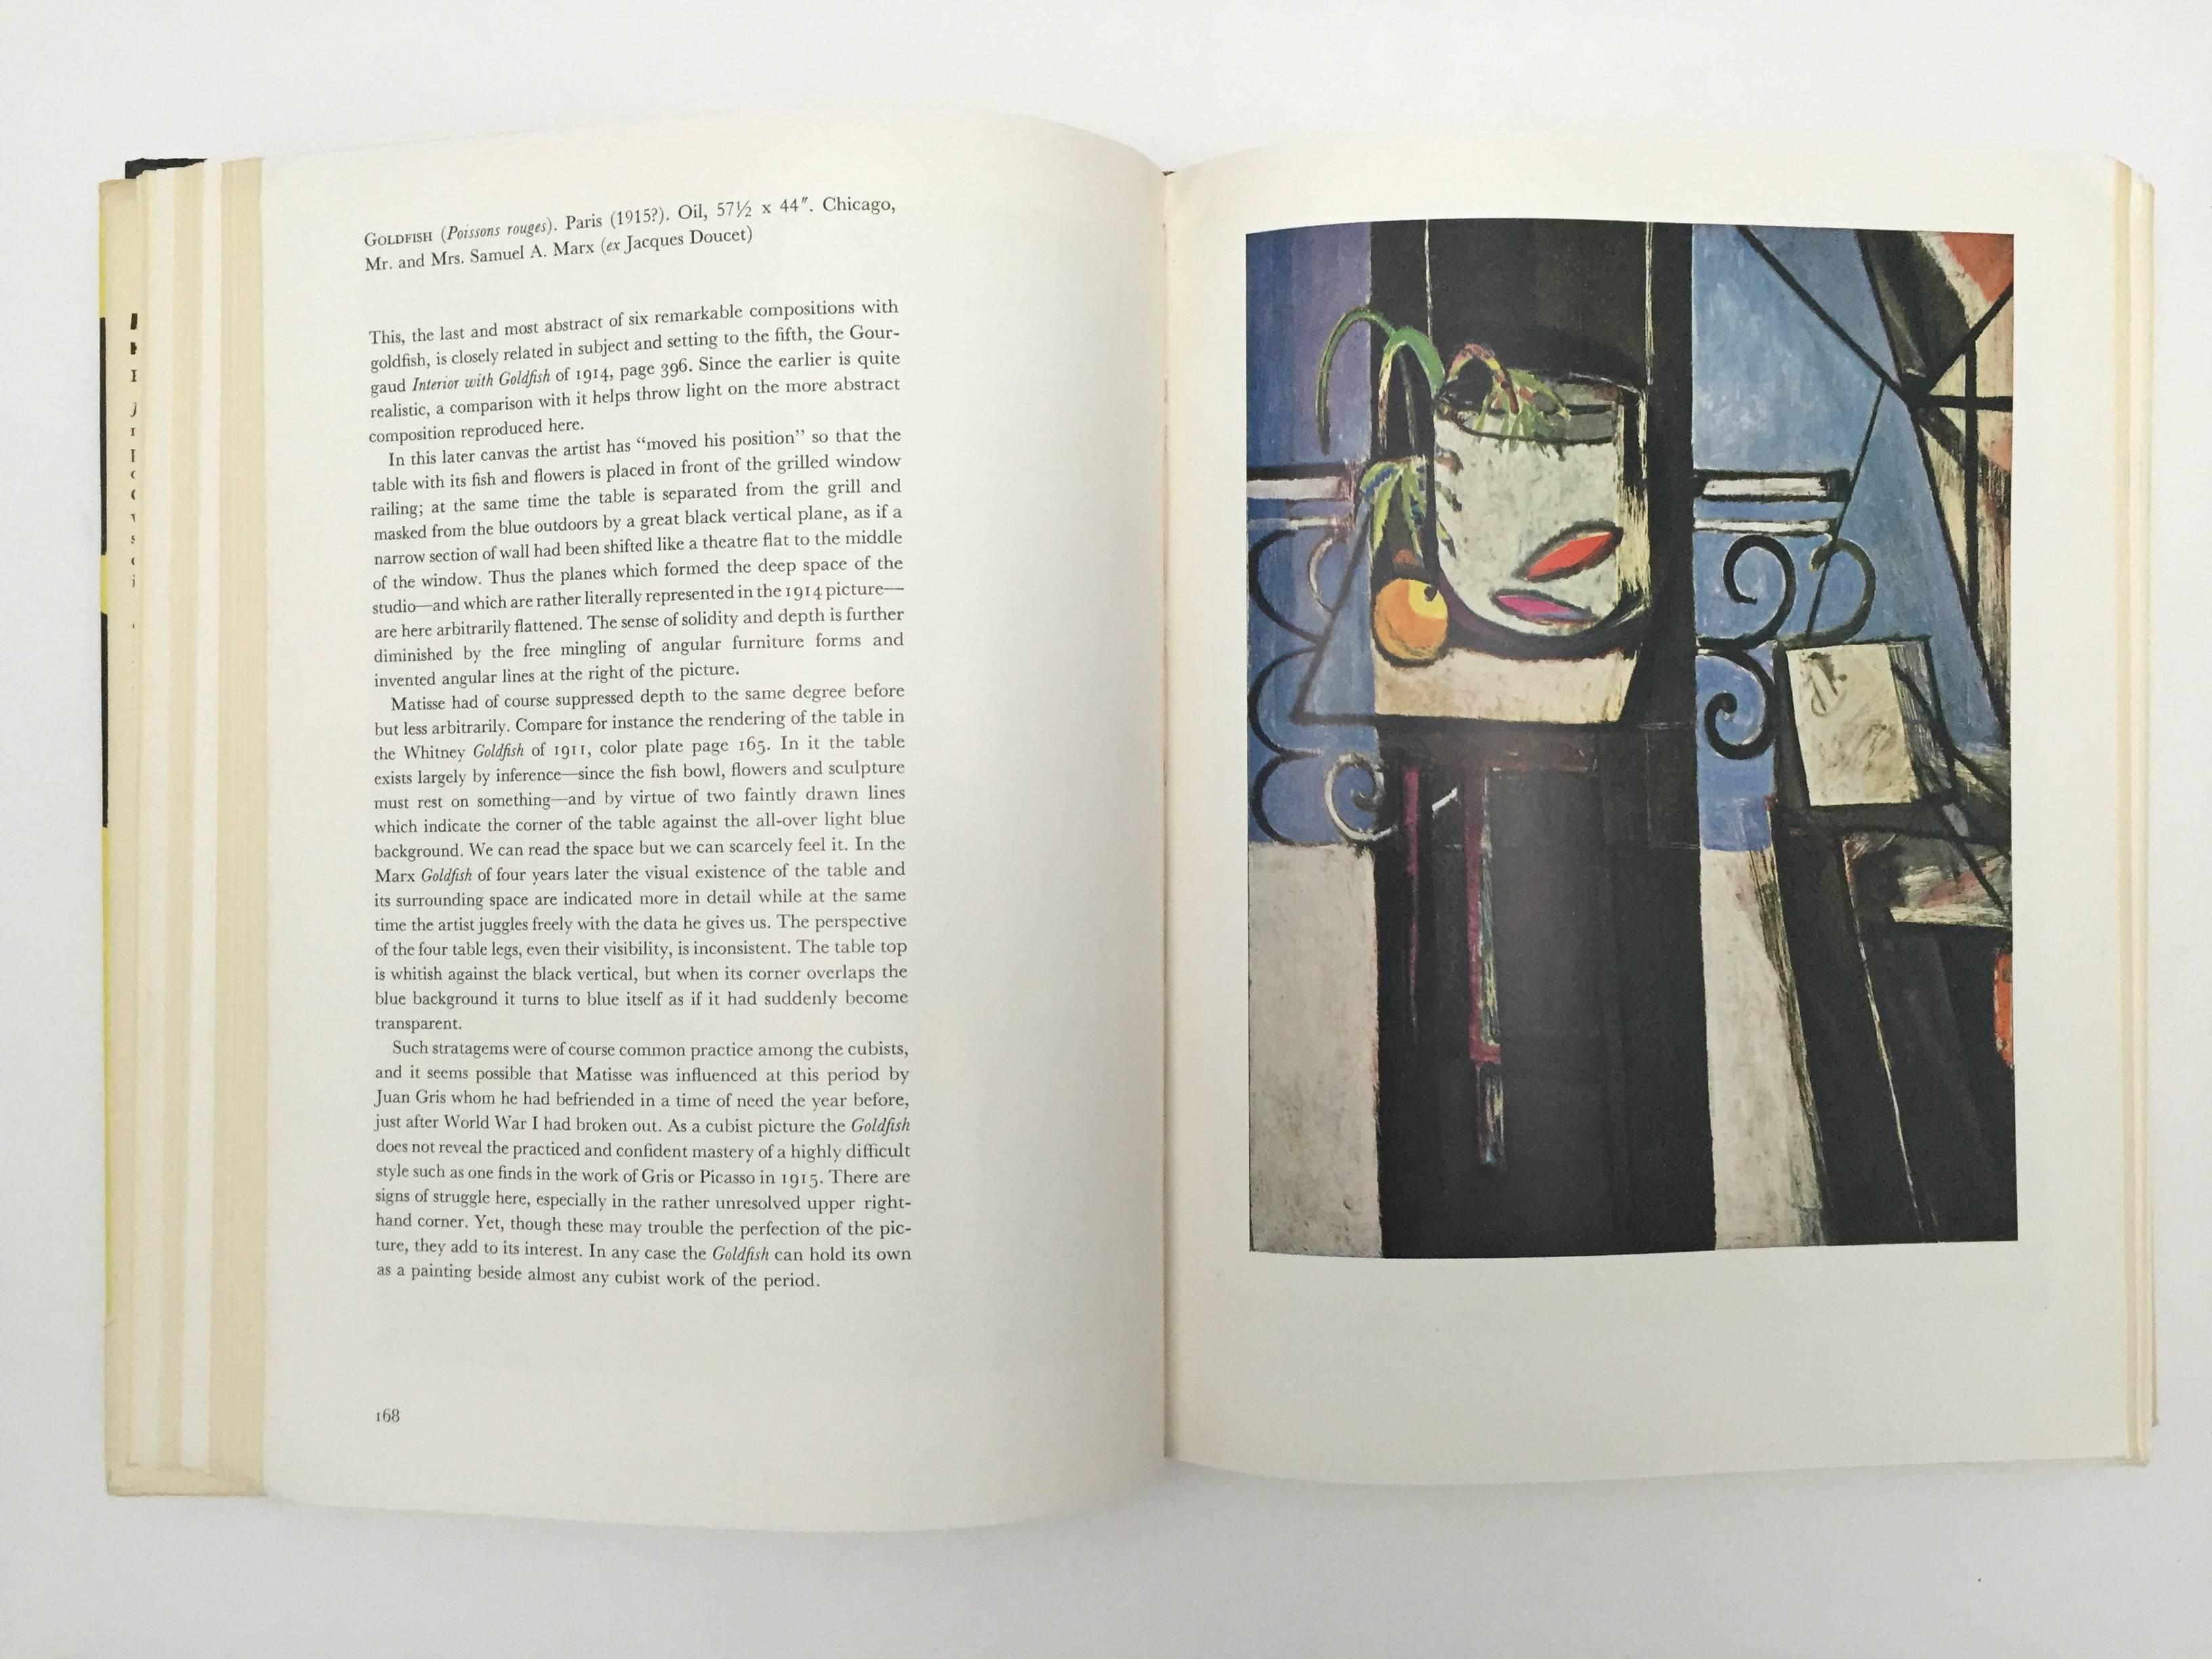 First edition, published by Museum of Modern Art, 1951.

This book is a key text on the life, work and public reception of Henri Matisse. Both an academic study of his work and a biographical piece of writing that contextualises his development as